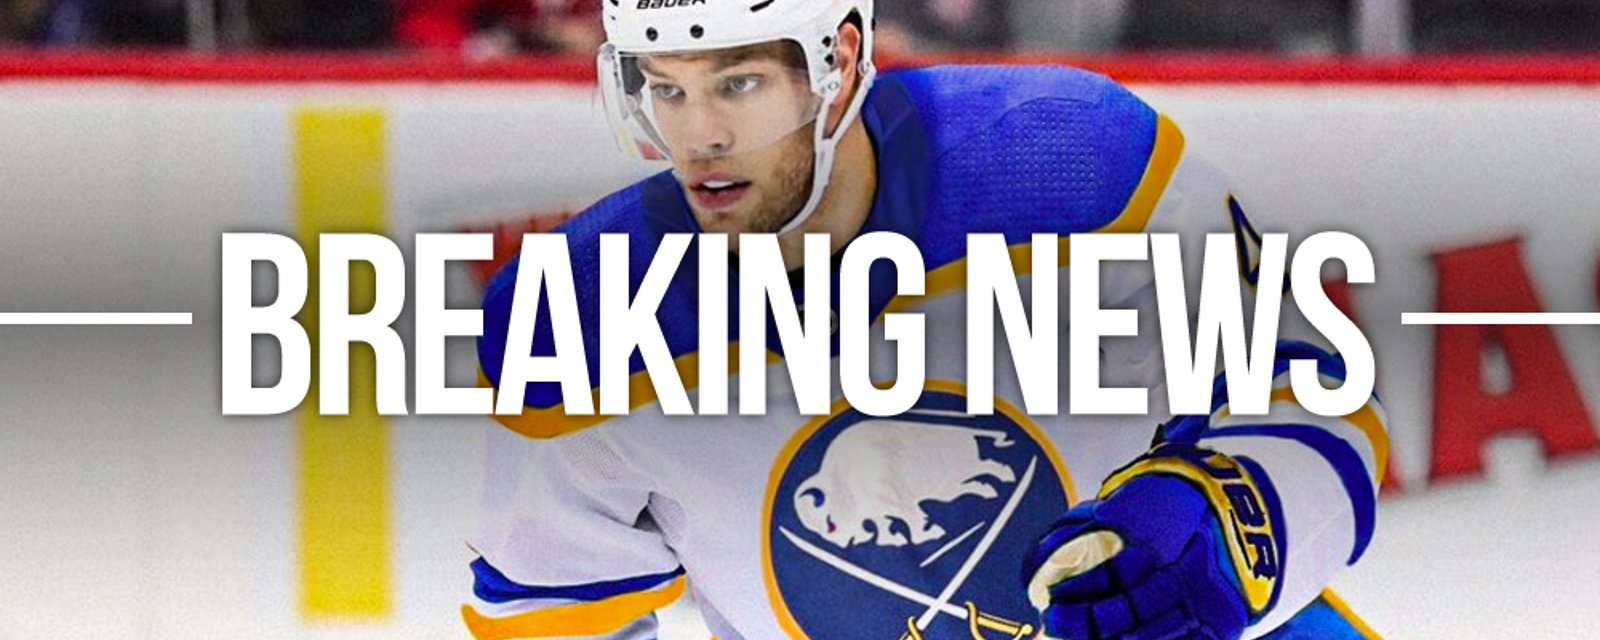 More games postponed! Taylor Hall and a total of 16 players added to protocol list